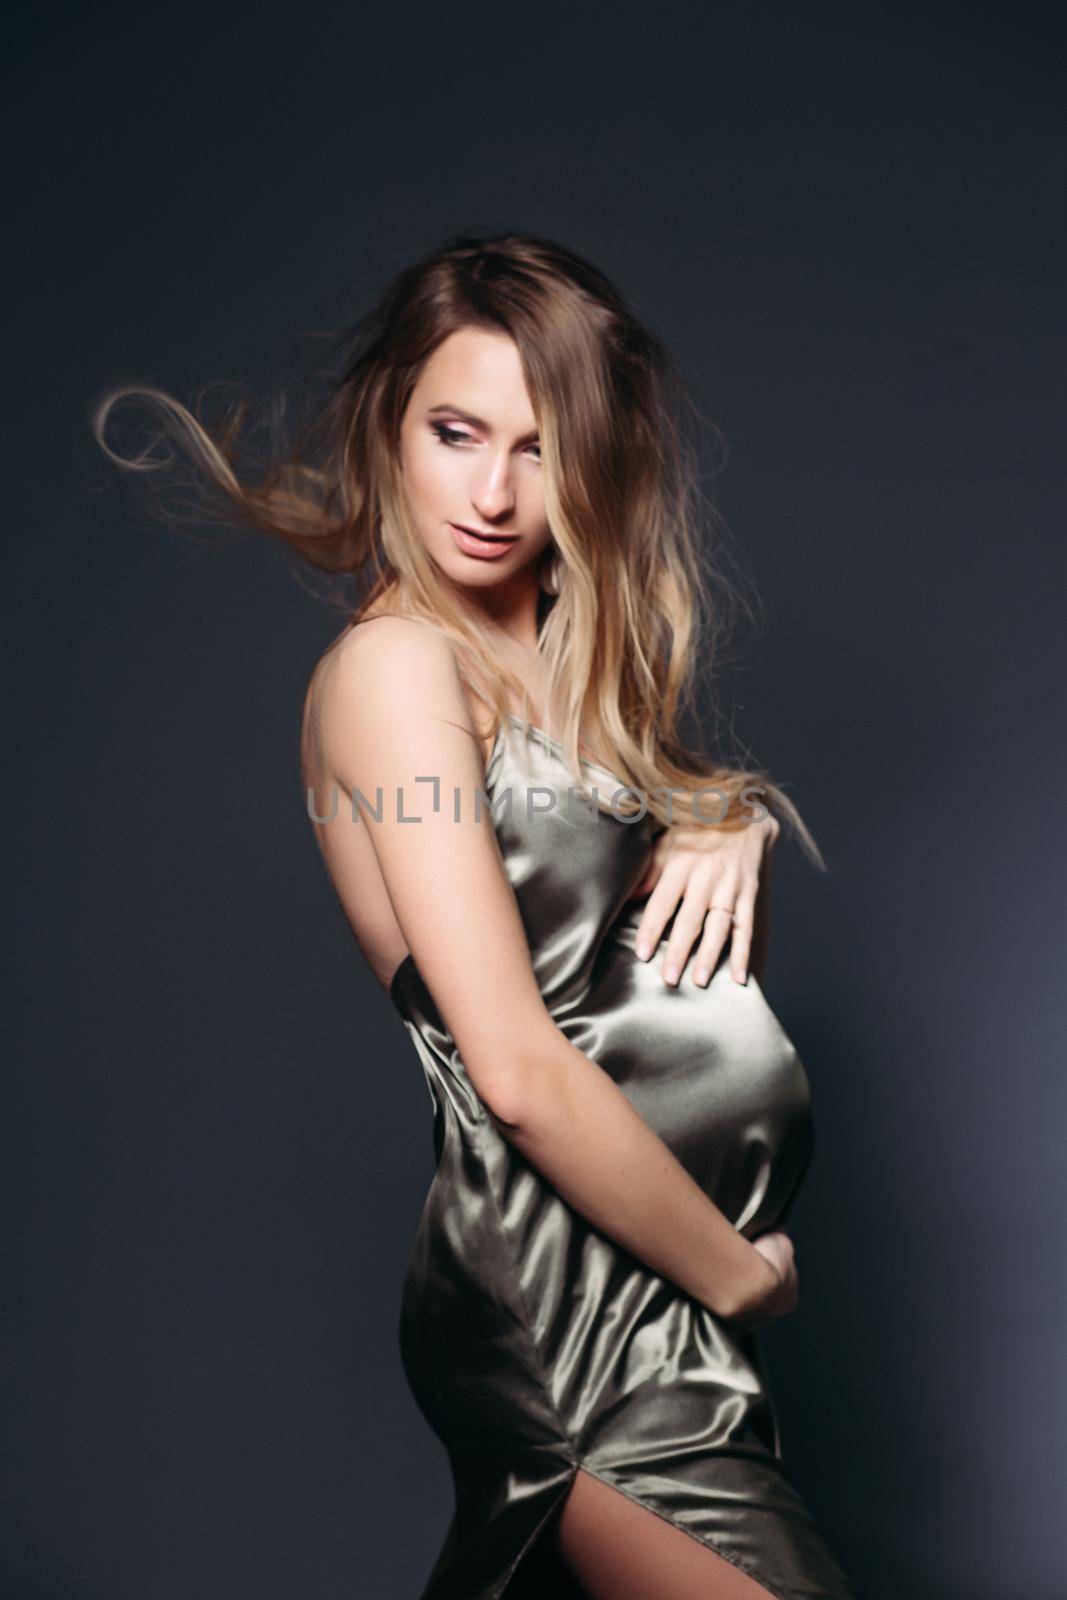 Blondie pegnant female, waiting for a baby, posing at dark studio in gray silk dress with hand up, looking at camera. Elegant future mother expacting her baby. Expextancy of motherhood. Stylish look.